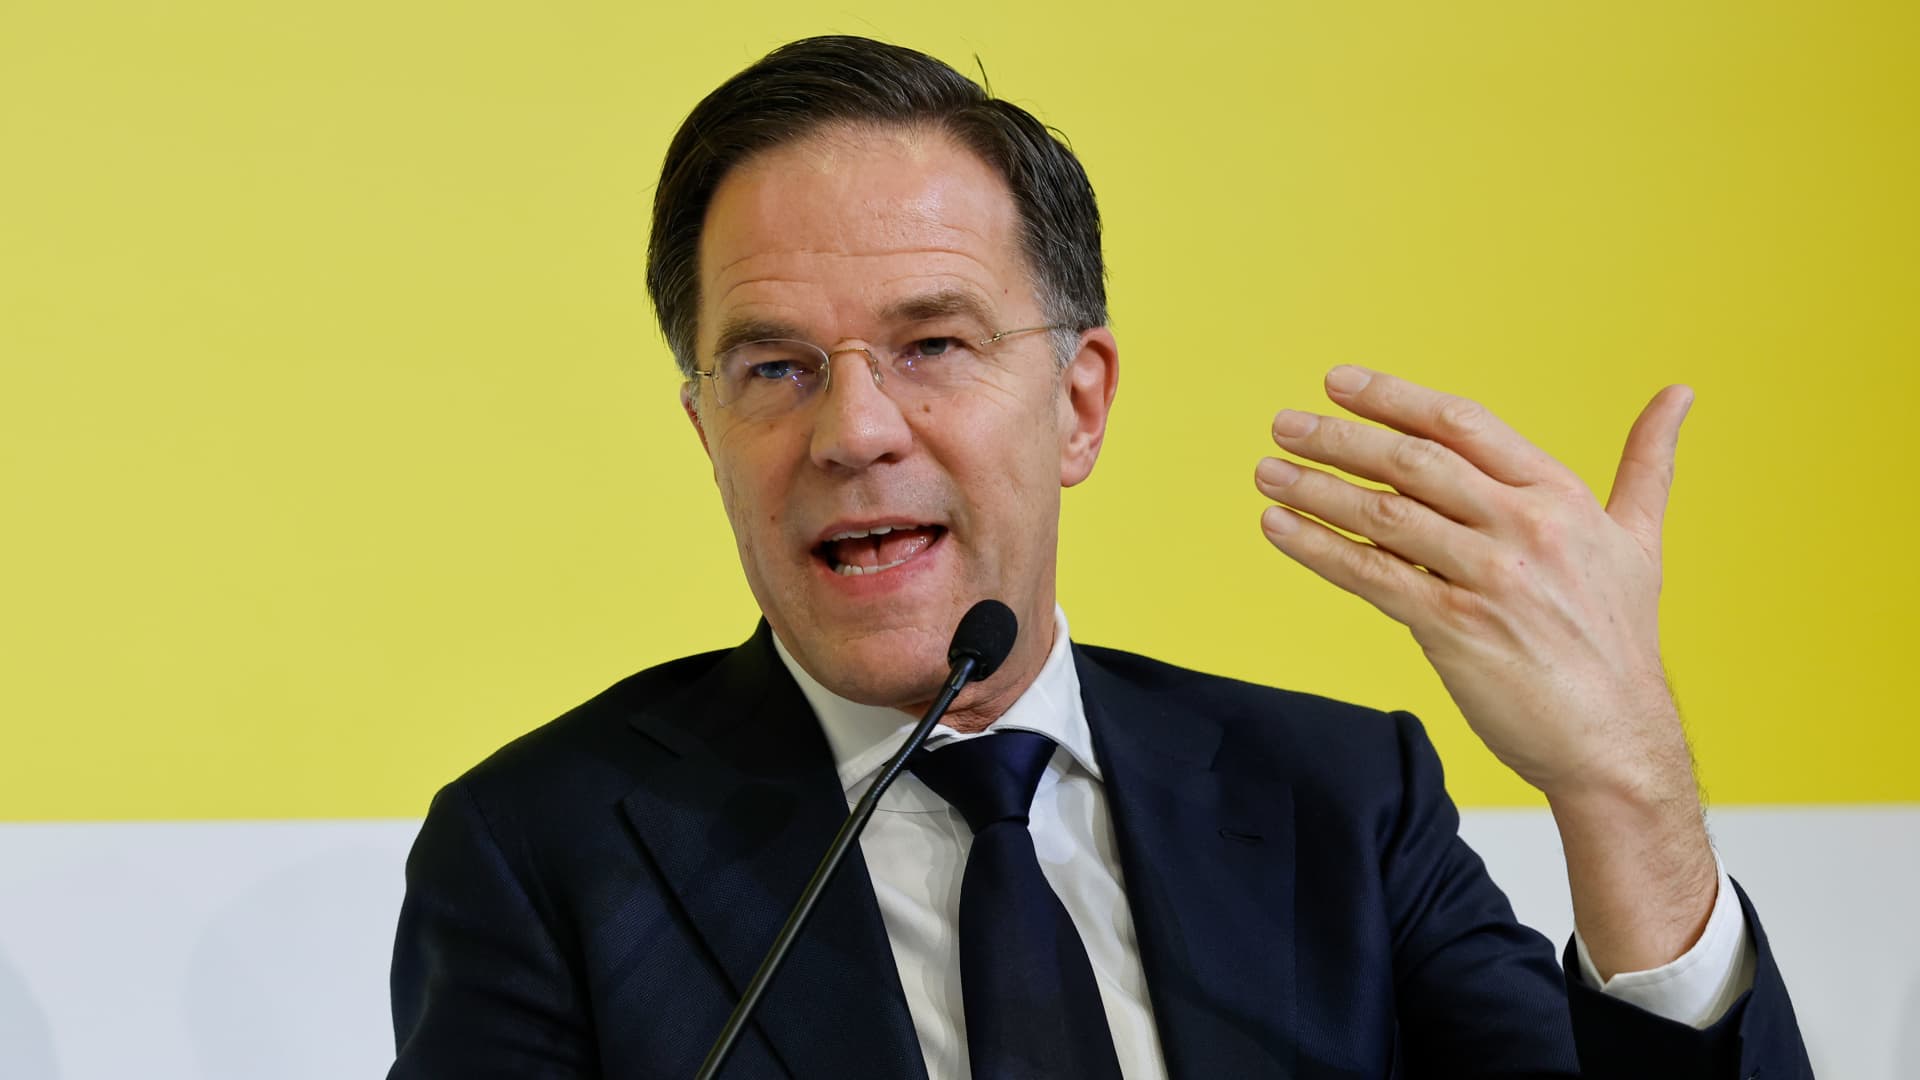 Europe needs to do more to support Ukraine, according to the Dutch prime minister.